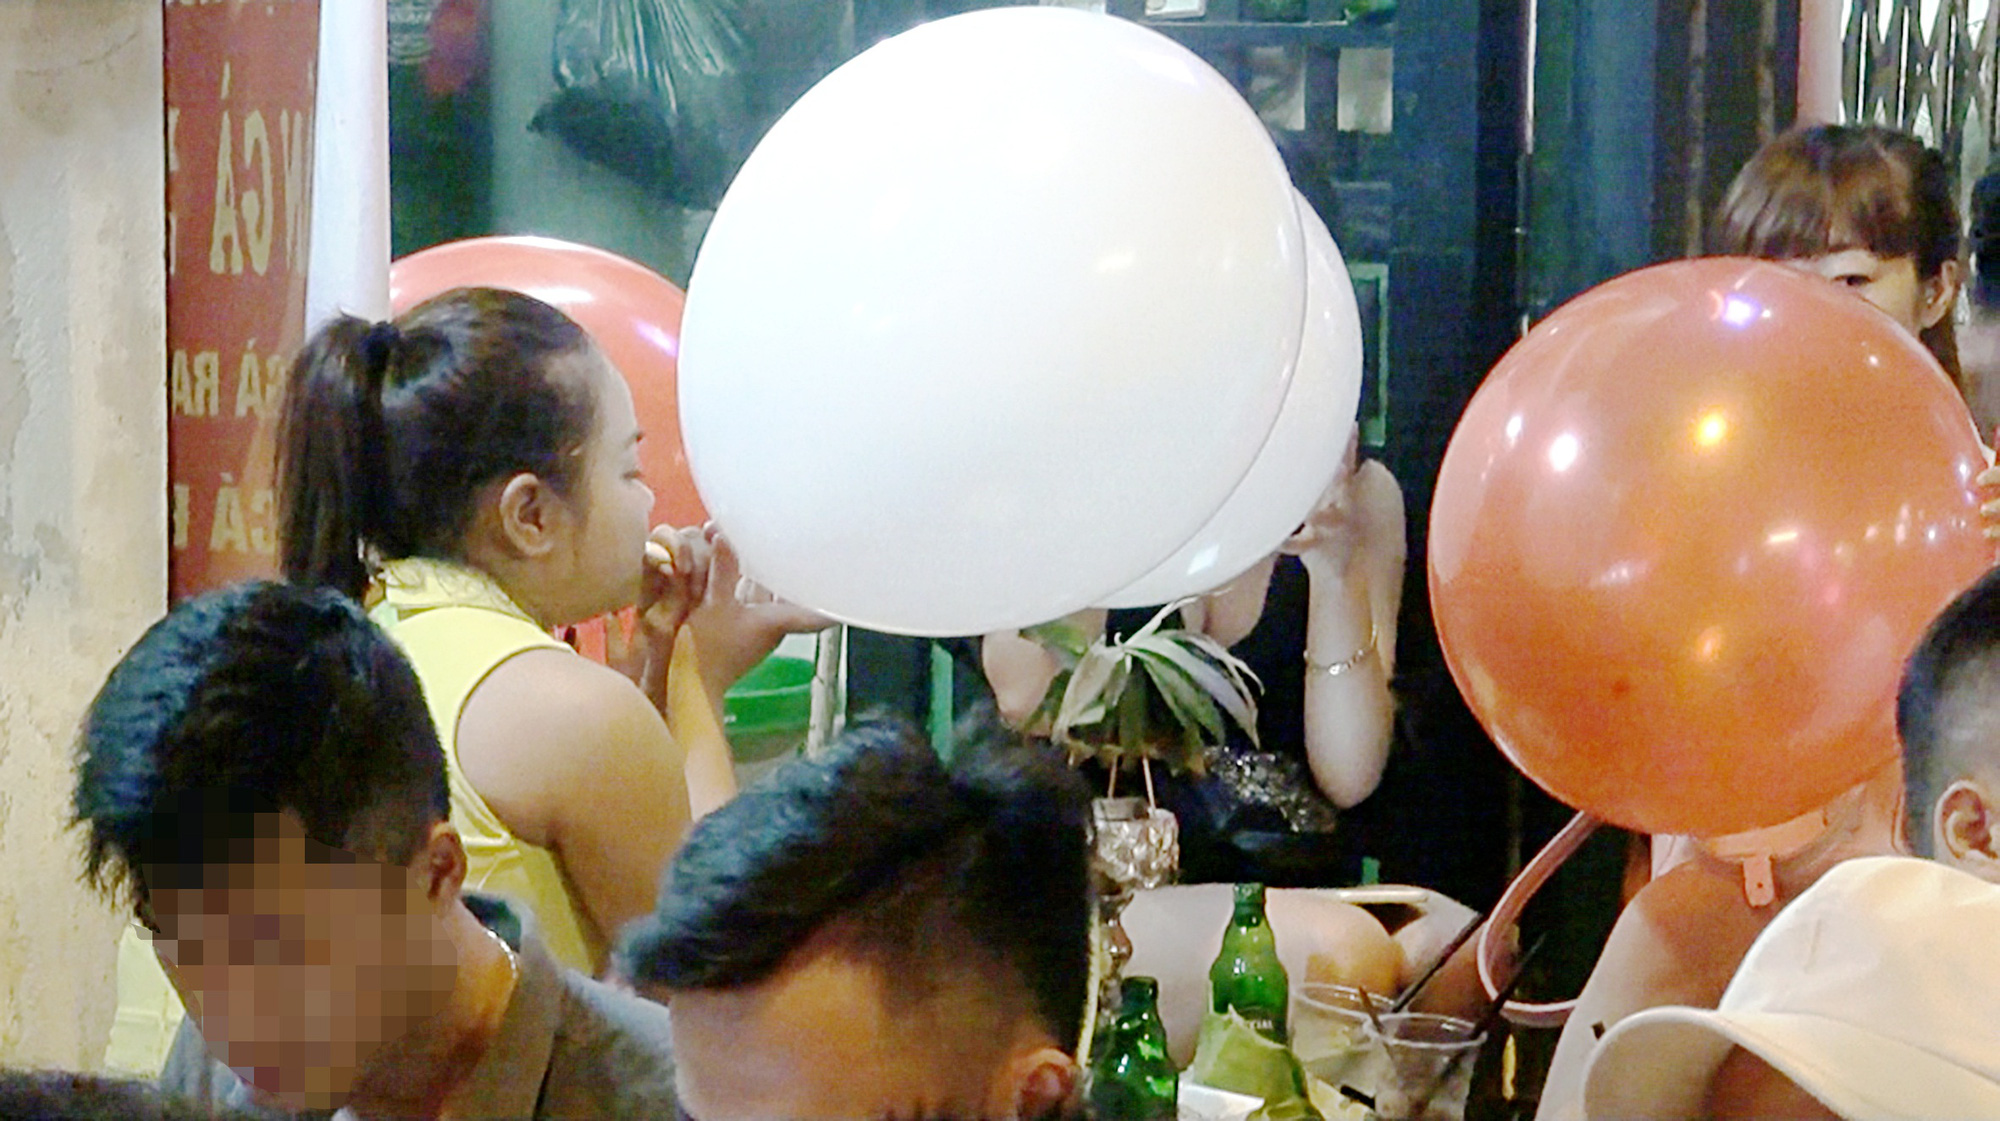 Vietnamese health ministry orders strict fight against recreational laughing gas